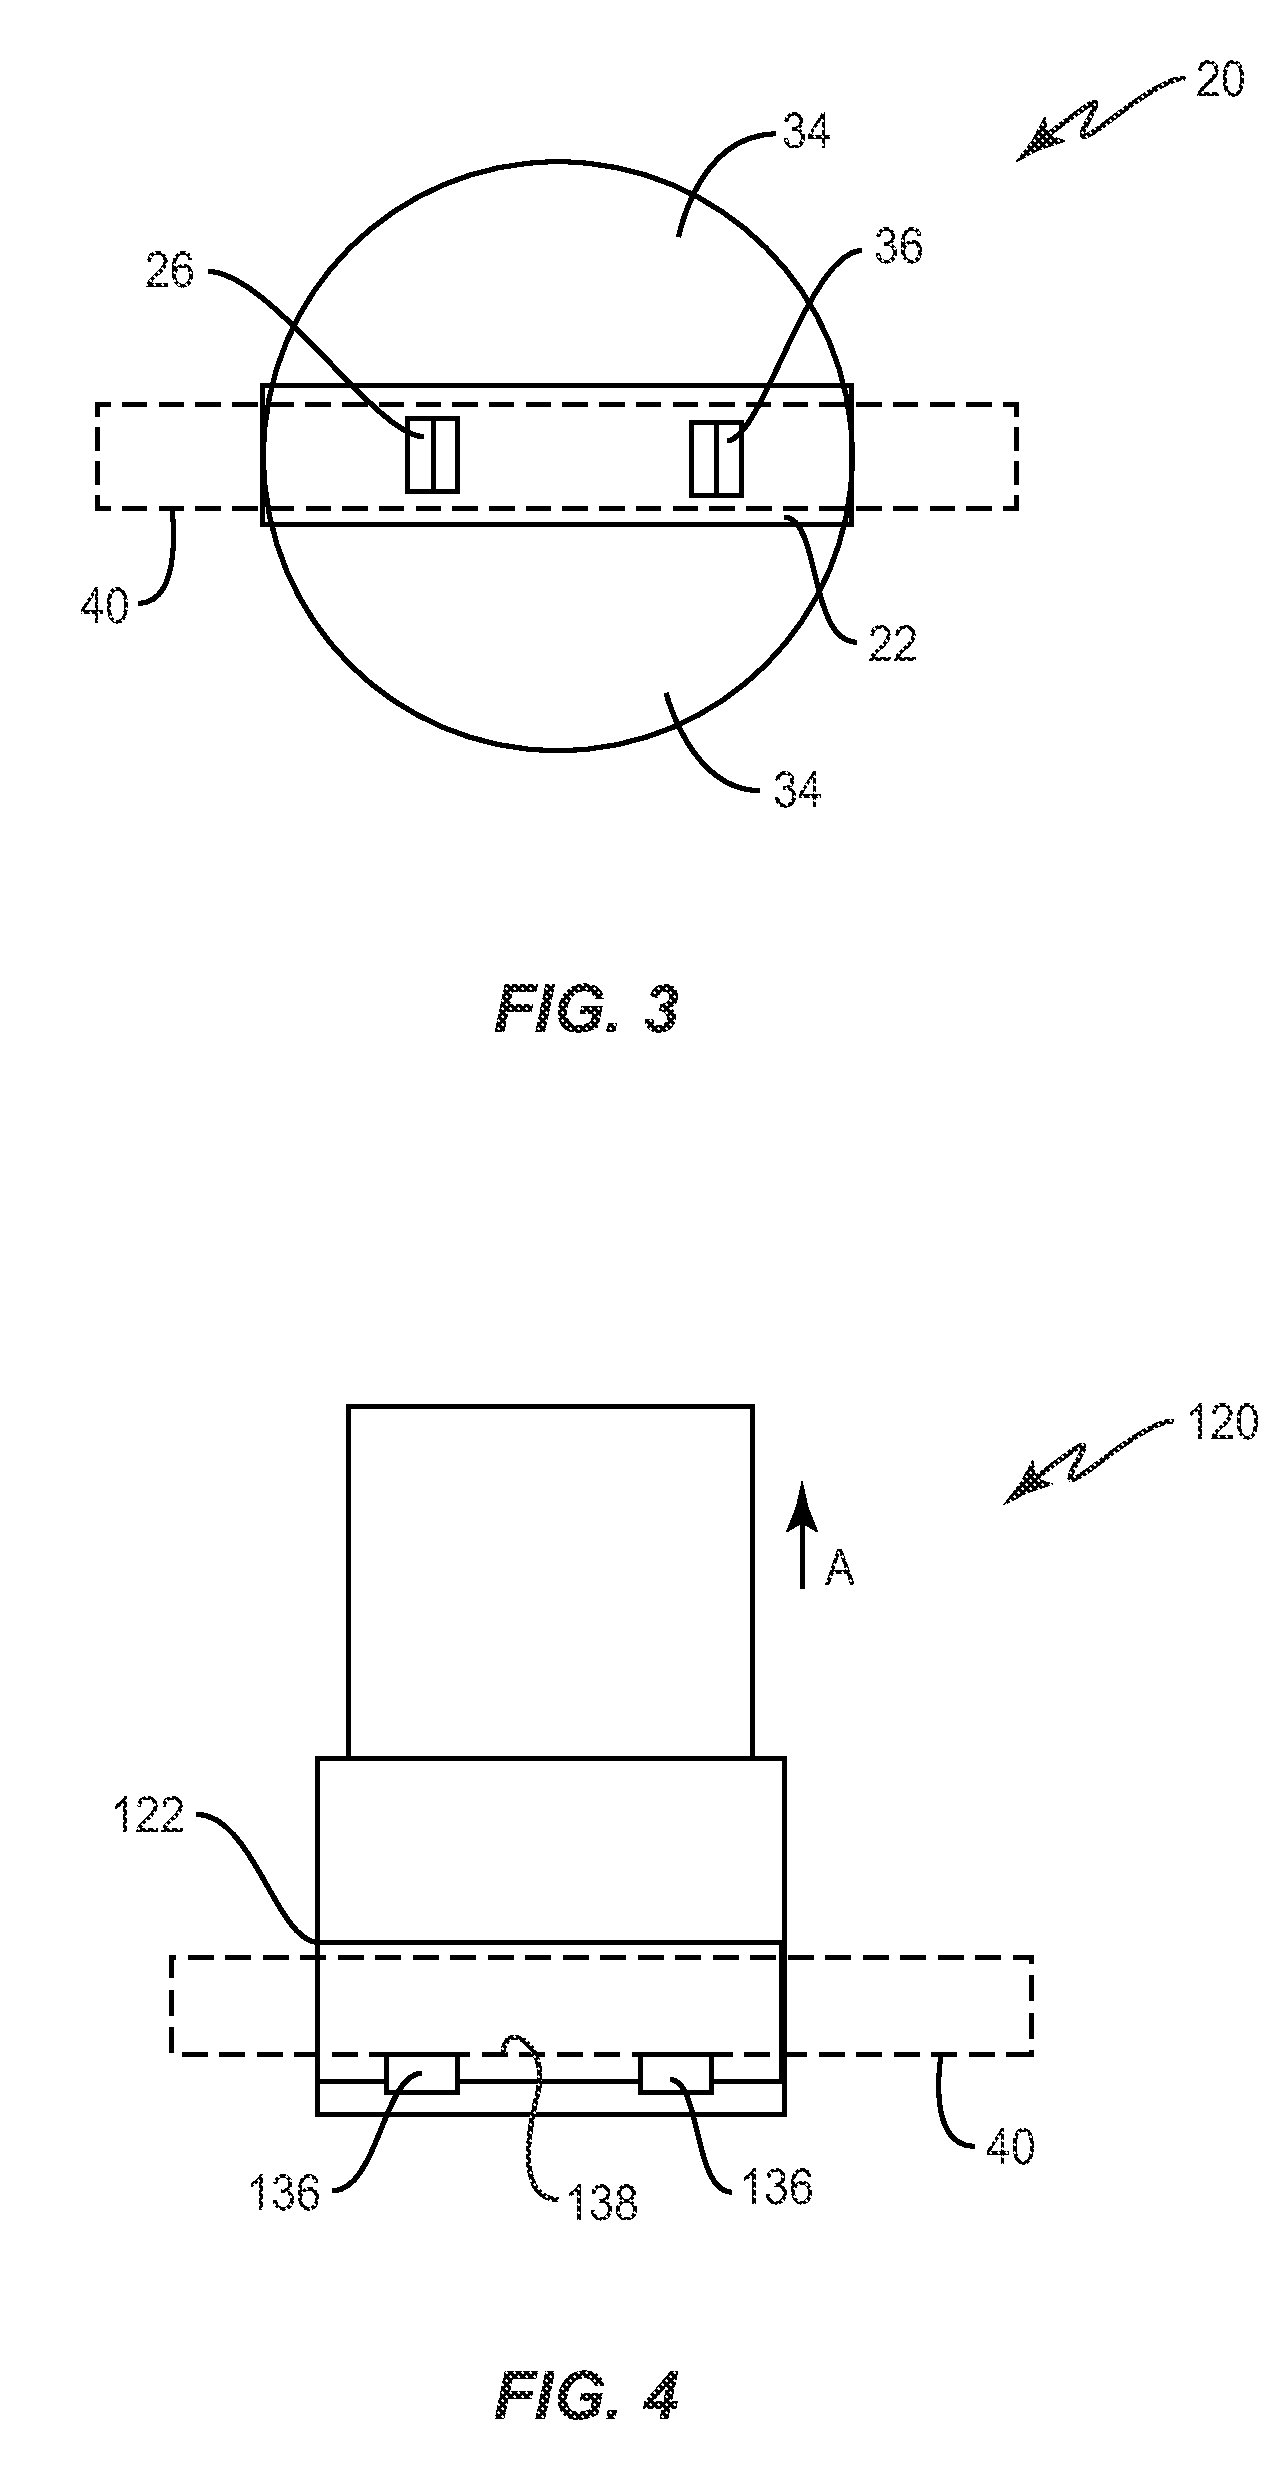 Spinal implant measuring system and method